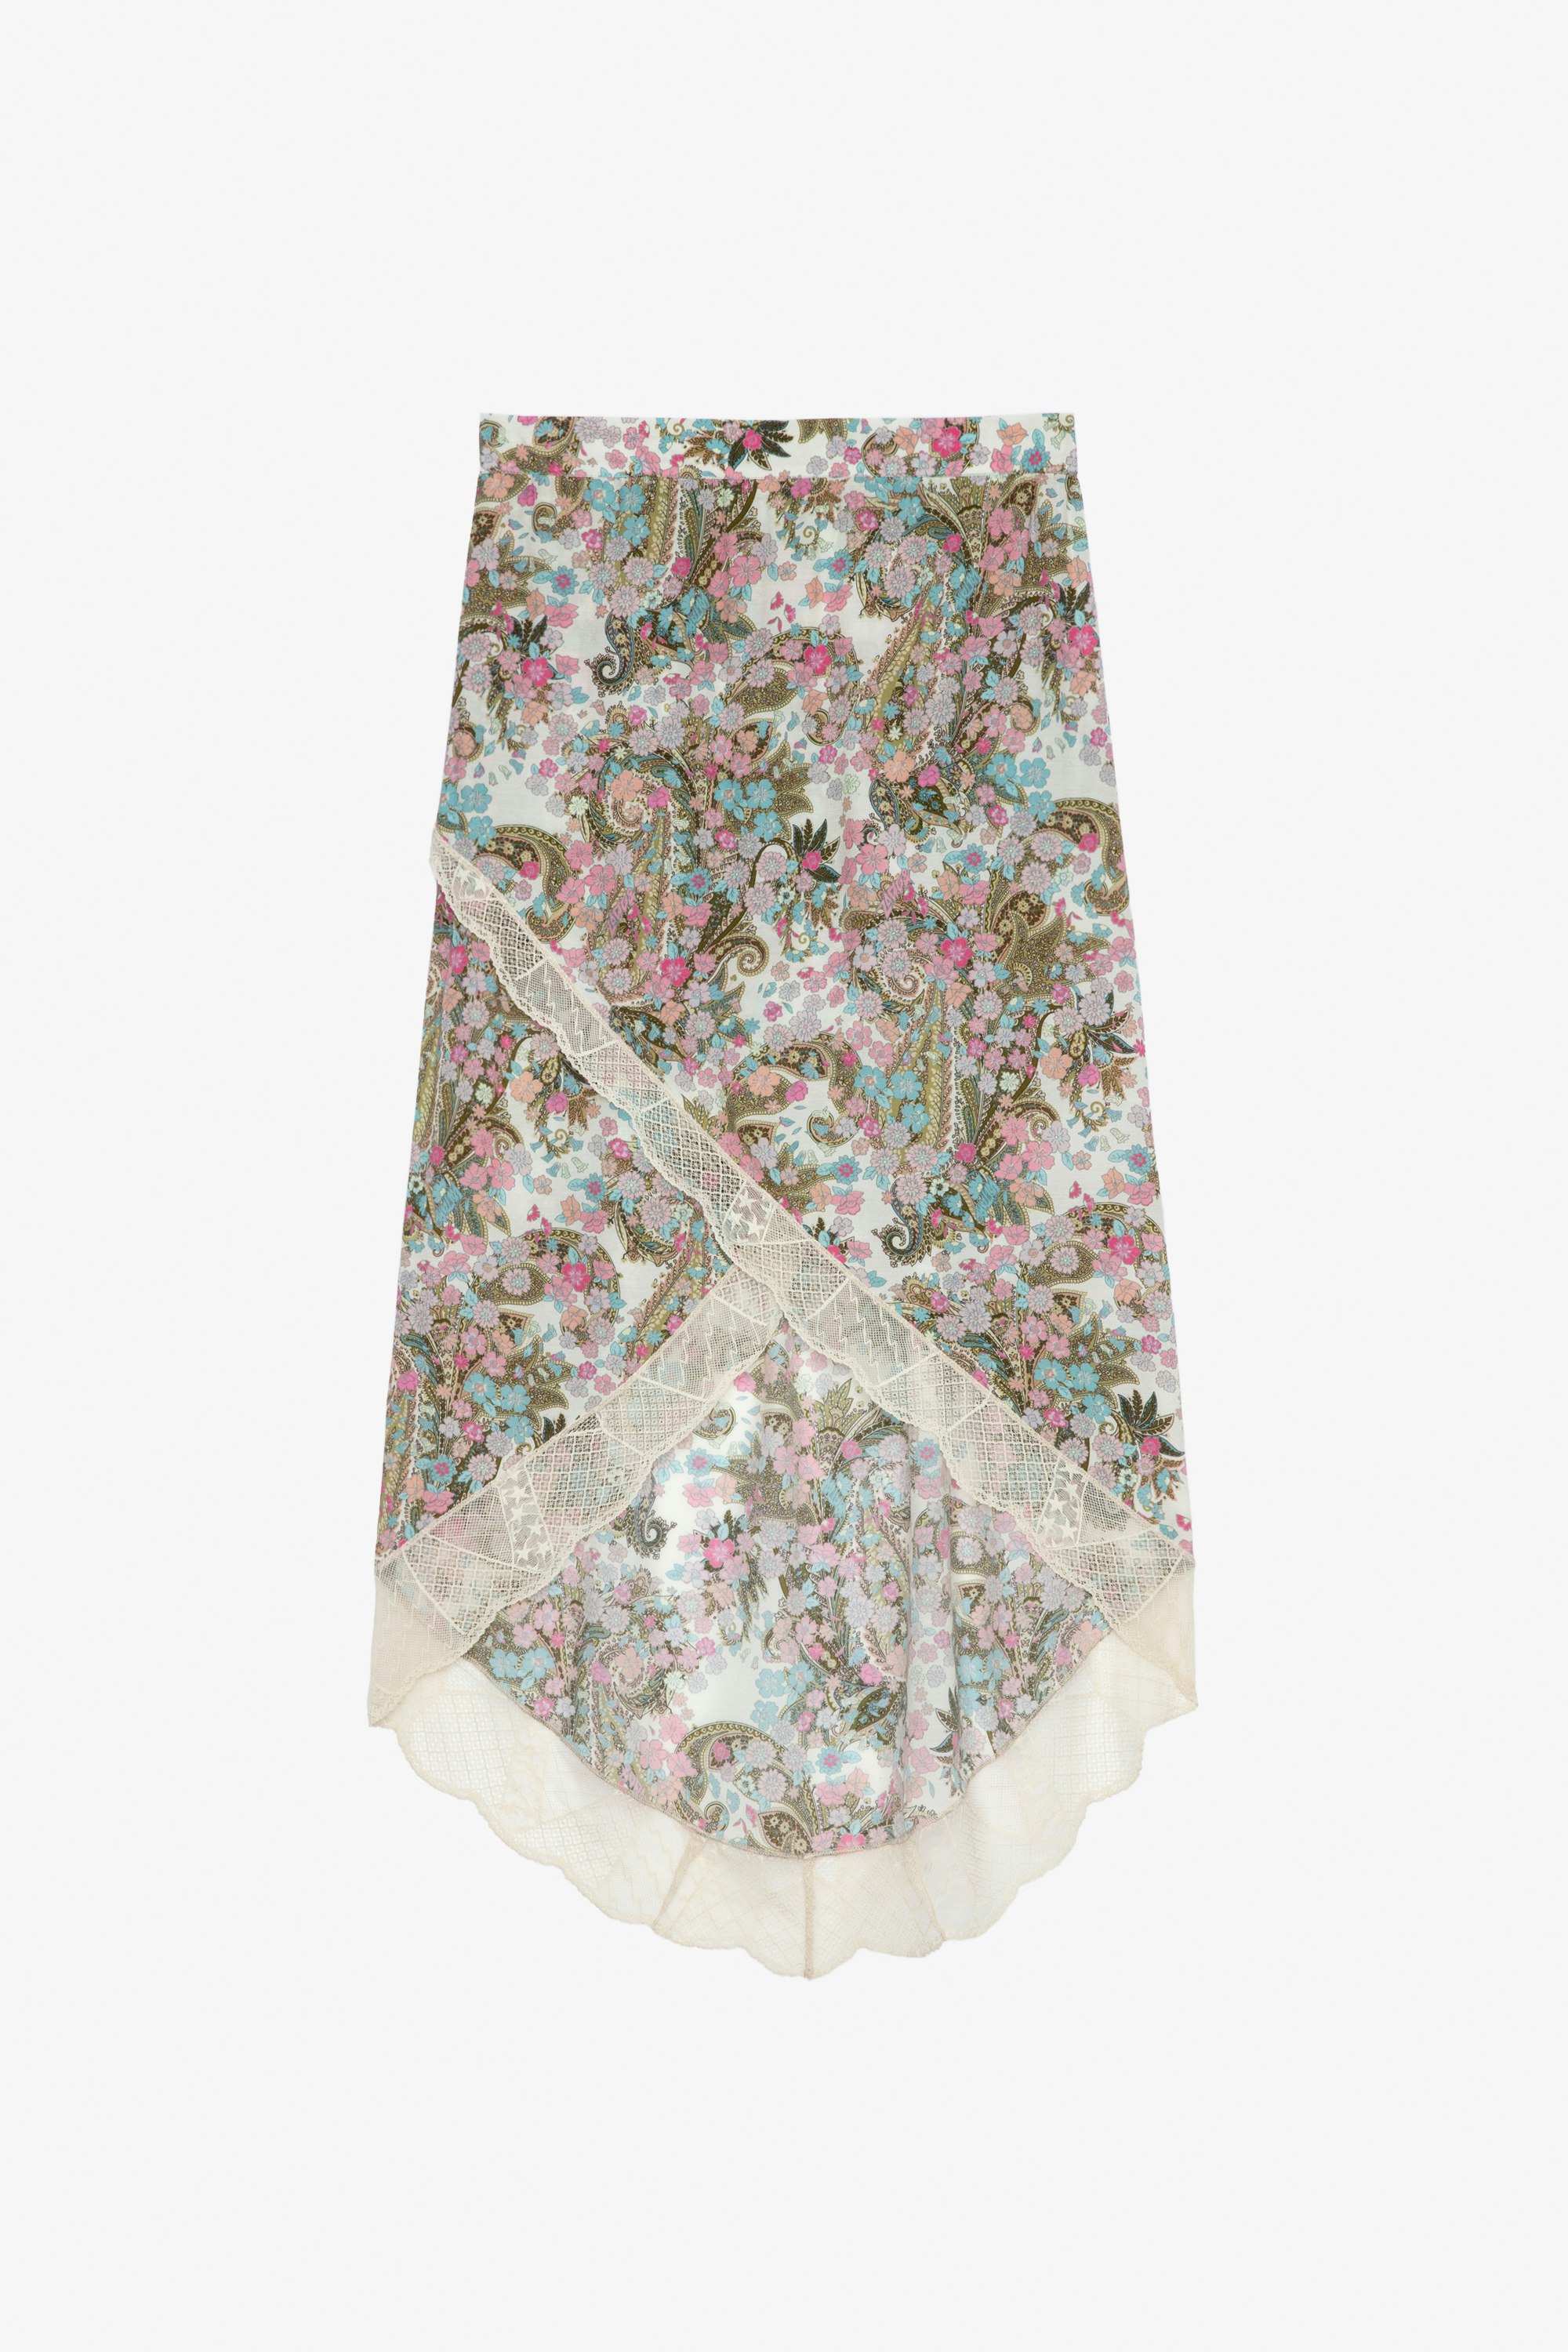 Jeudie Skirt Mid-length mauve asymmetrical wrap skirt with lace strips and floral print